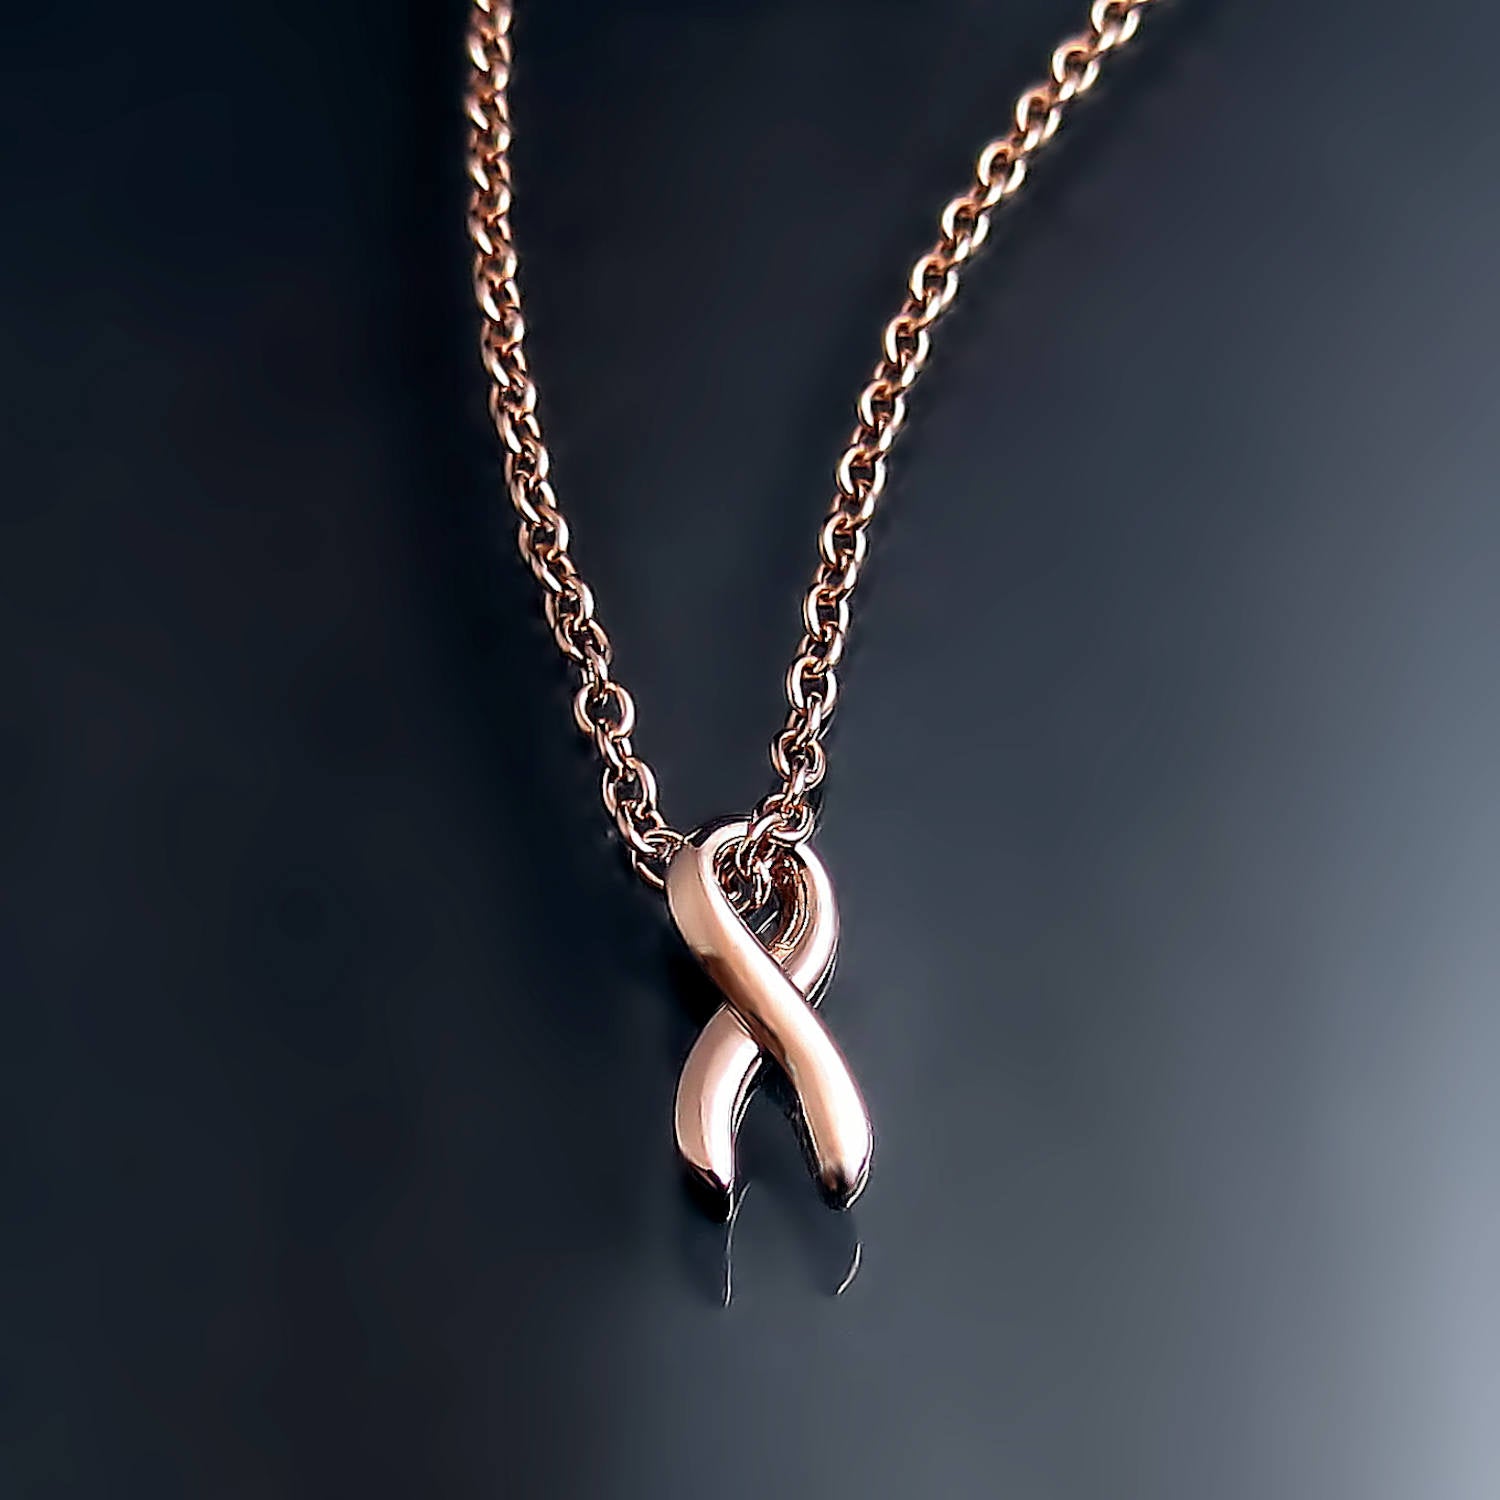 N8517 CRR BREAST CANCER PINK RIBBON PENDANT NECKLACE